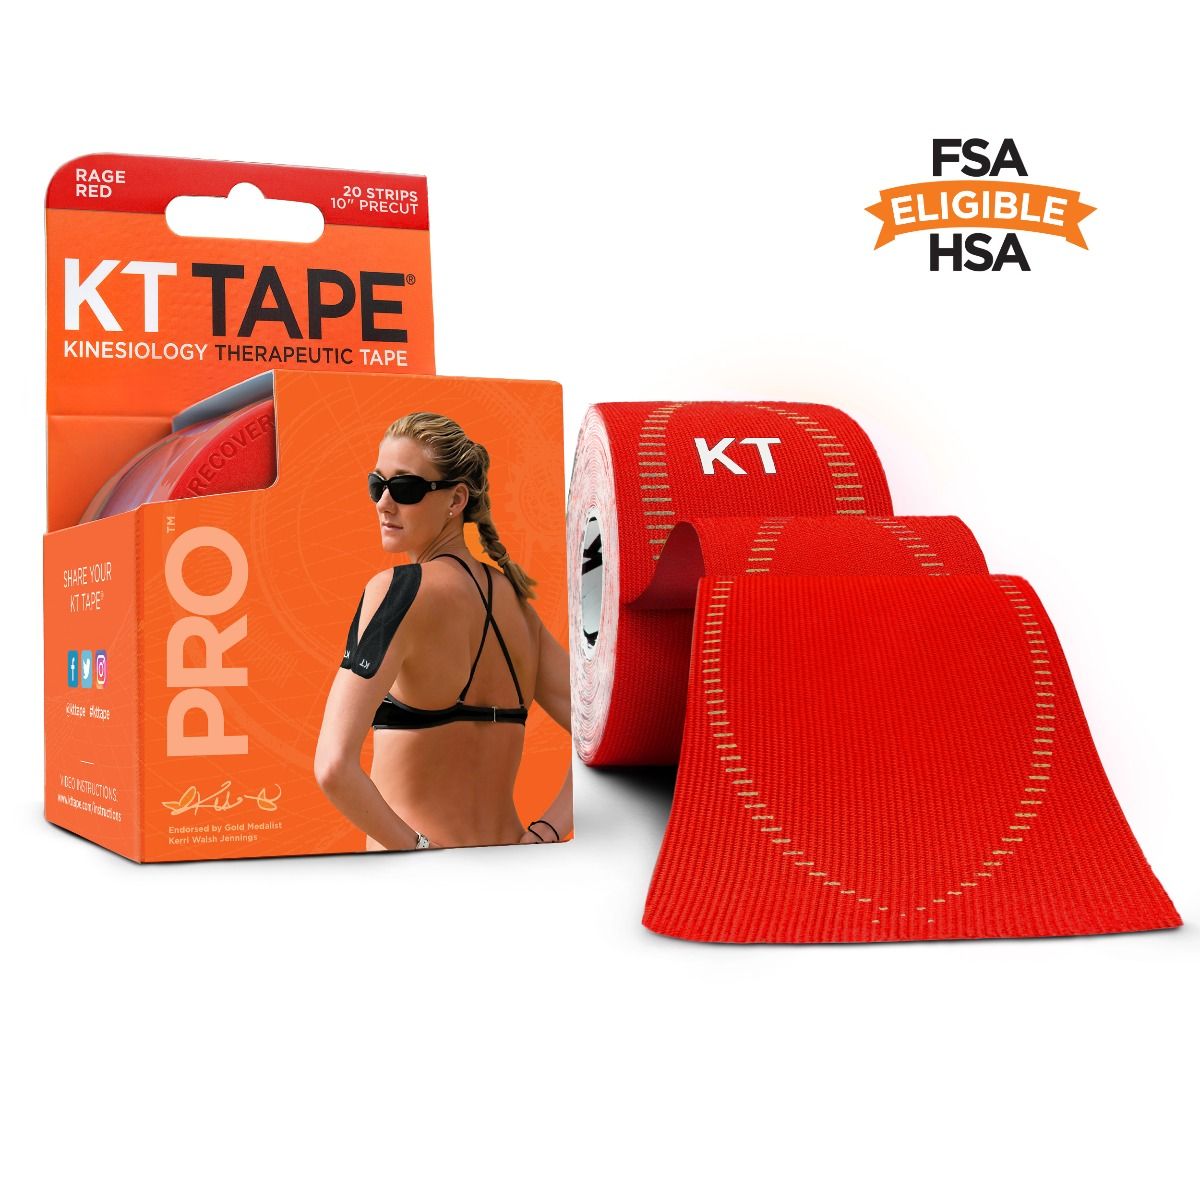 Image of the KT Tape Pro and it's packaging in the color Red